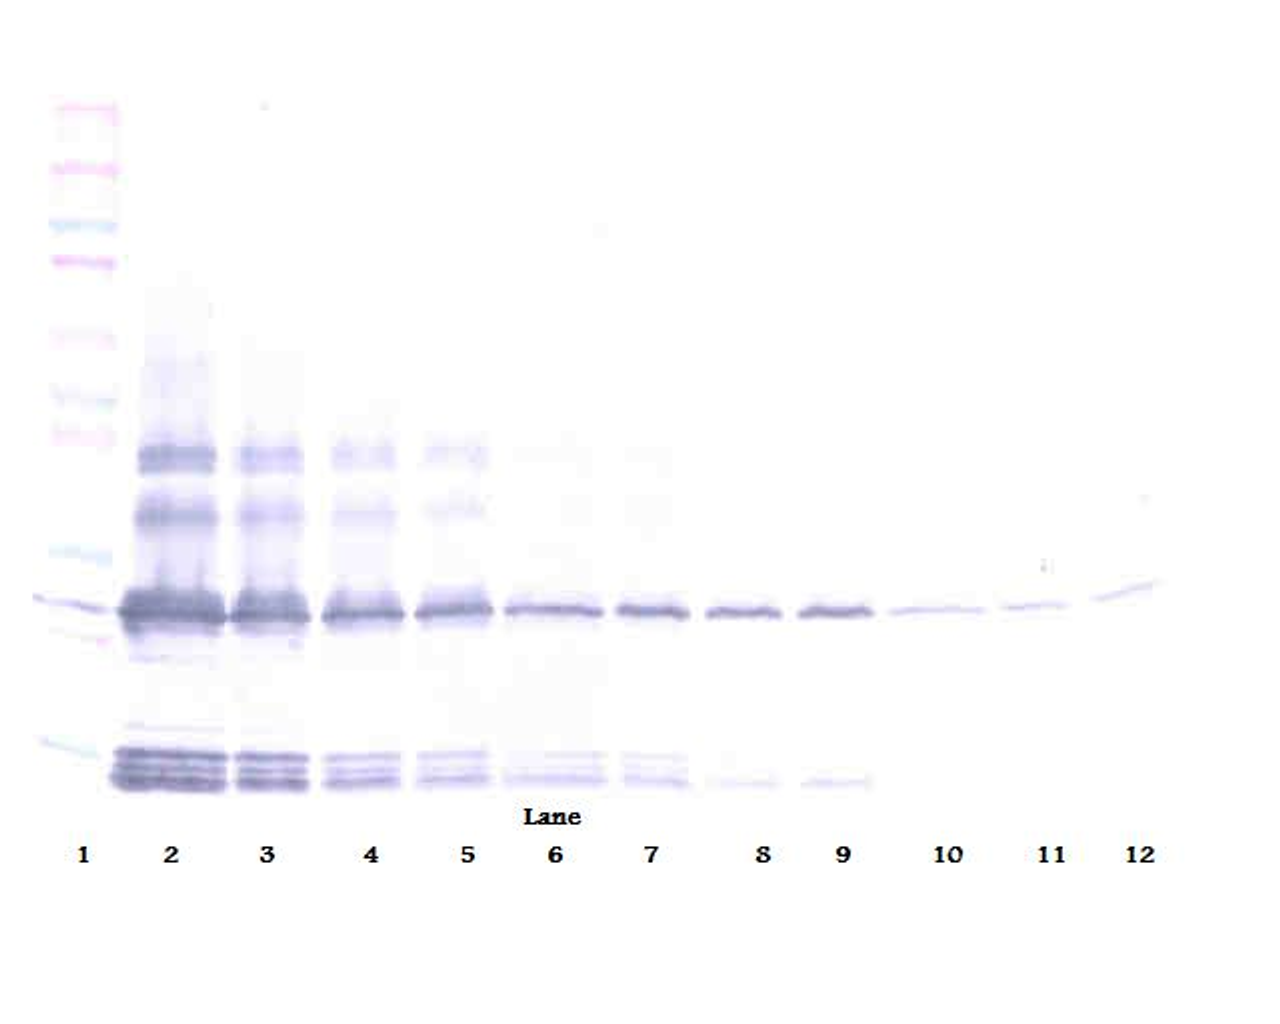 To detect hBMP-2 by Western Blot analysis this antibody can be used at a concentration of 0.1 - 0.2 mg/ml. Used in conjunction with compatible secondary reagents the detection limit for recombinant hBMP-2 is 1.5 - 3.0 ng/lane, under either reducing or non-reducing conditions.